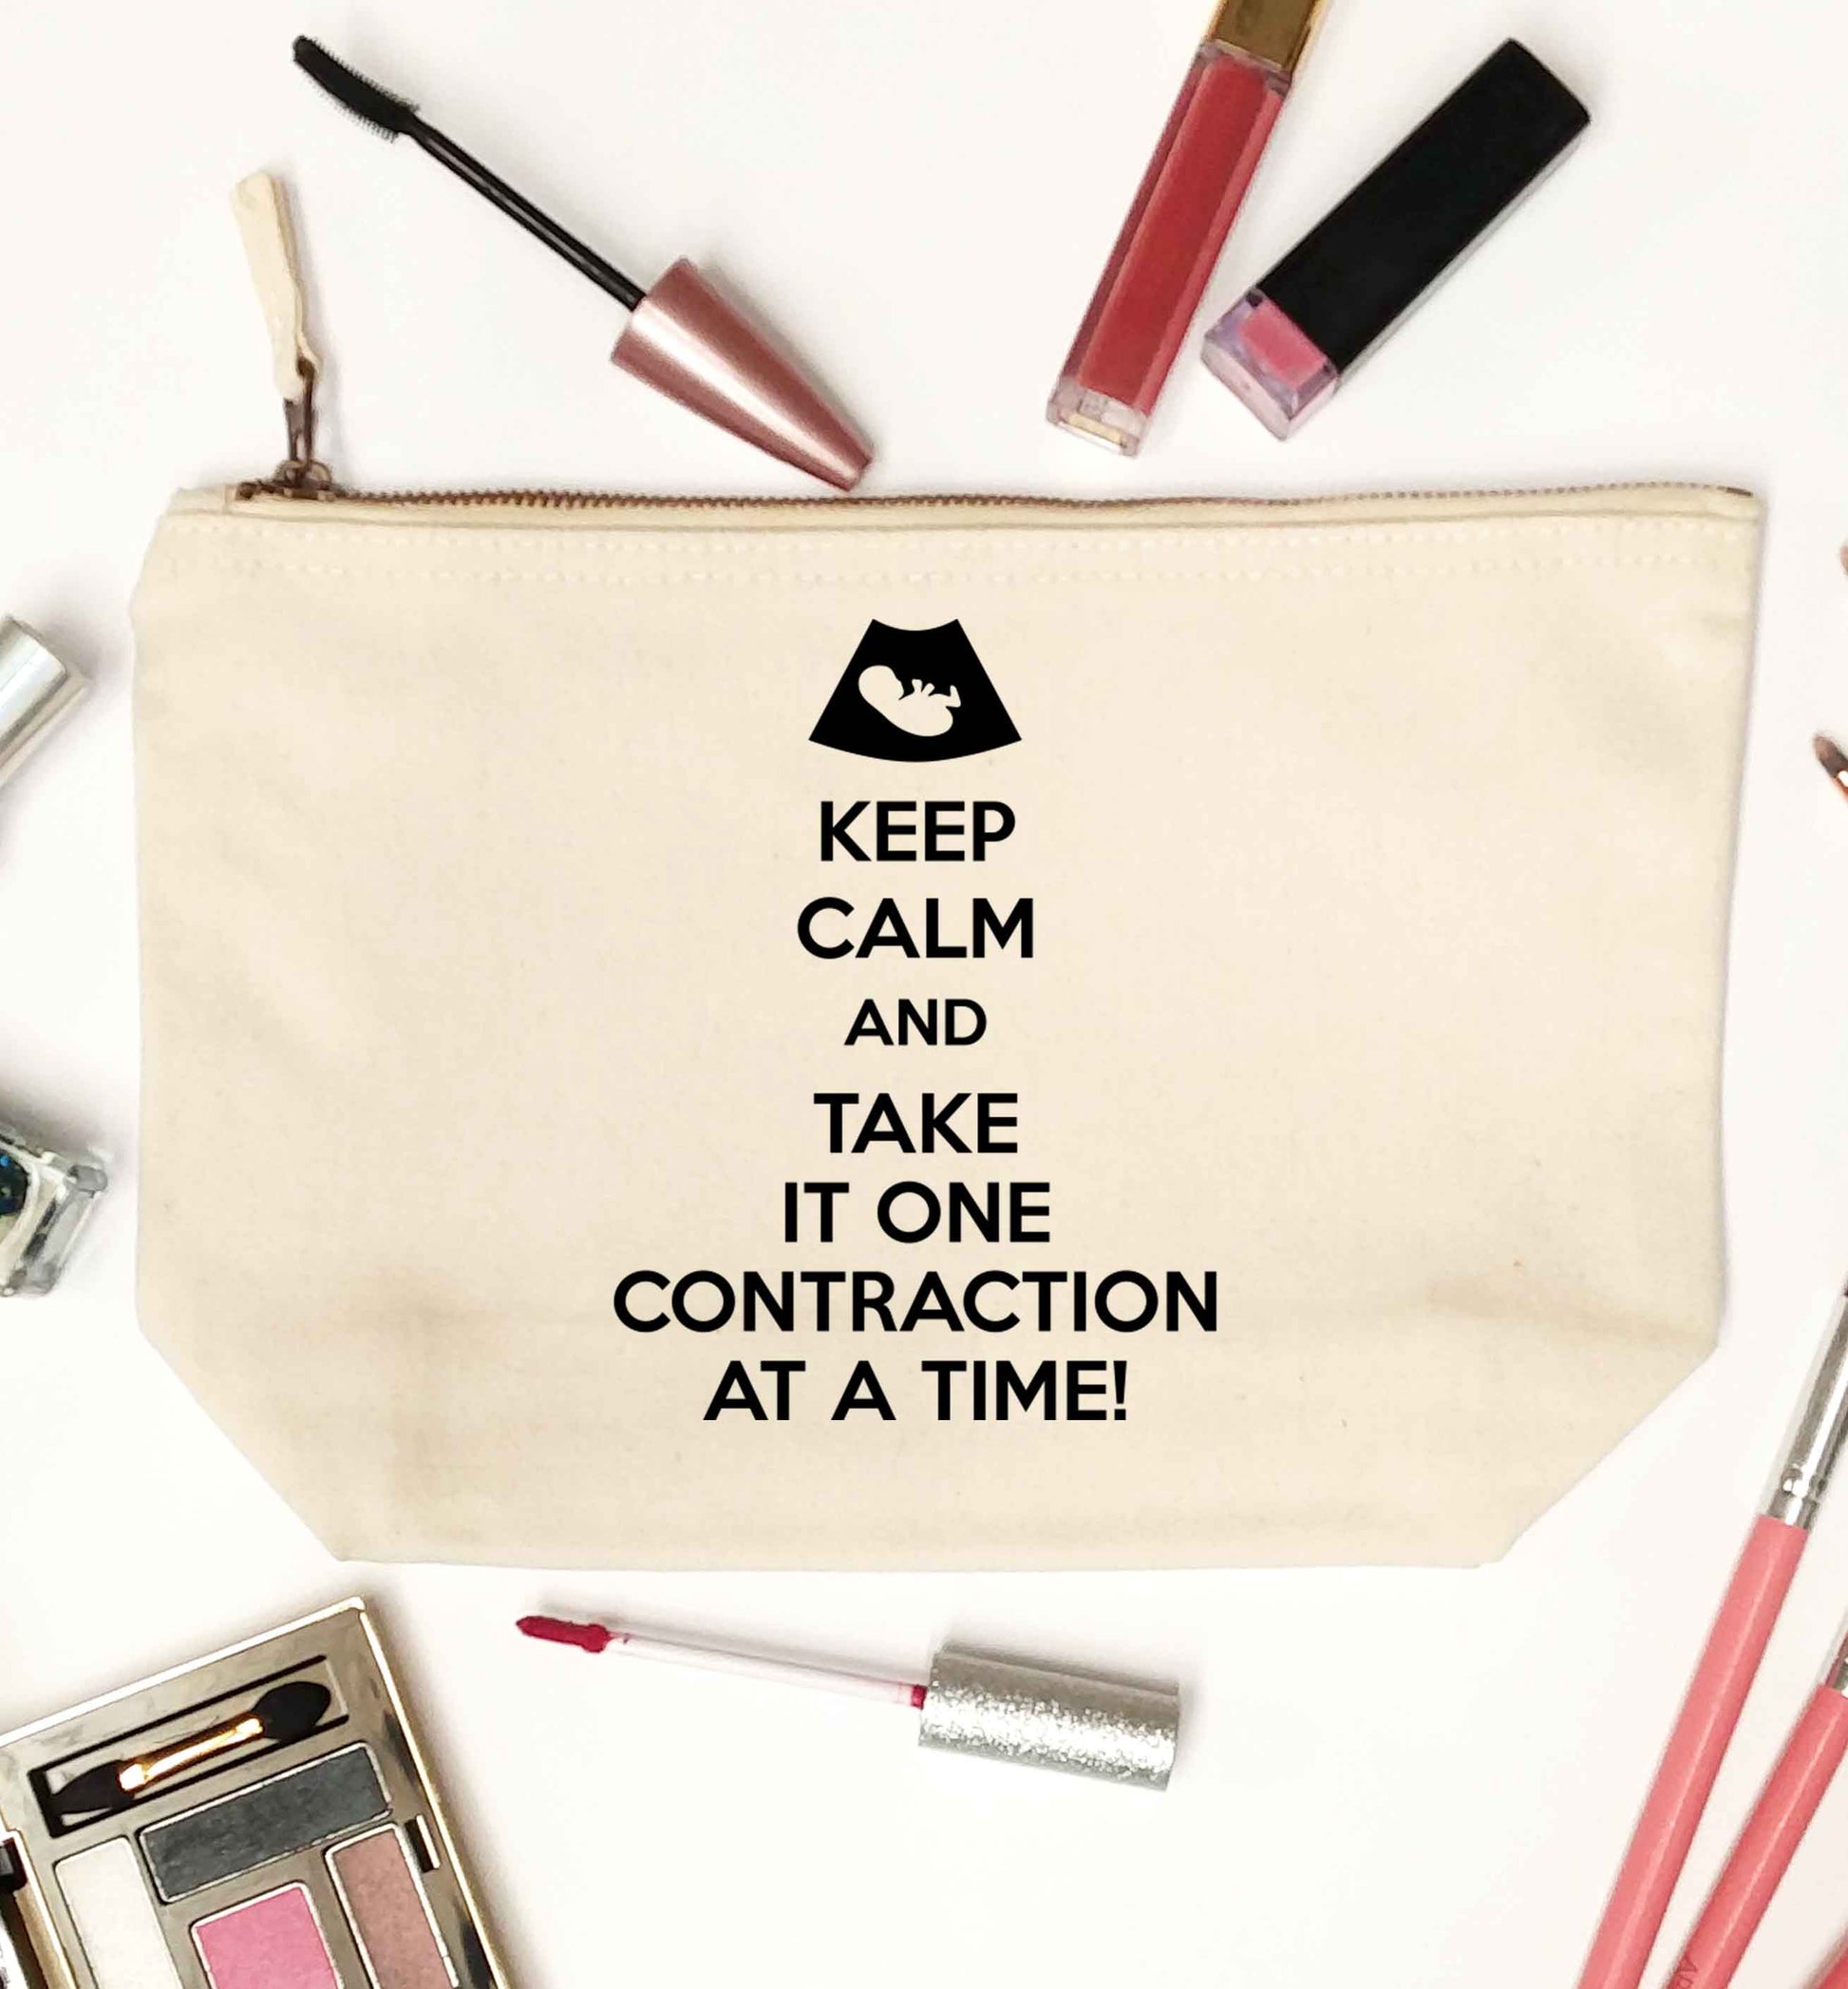 Keep calm and take it one contraction at a time natural makeup bag